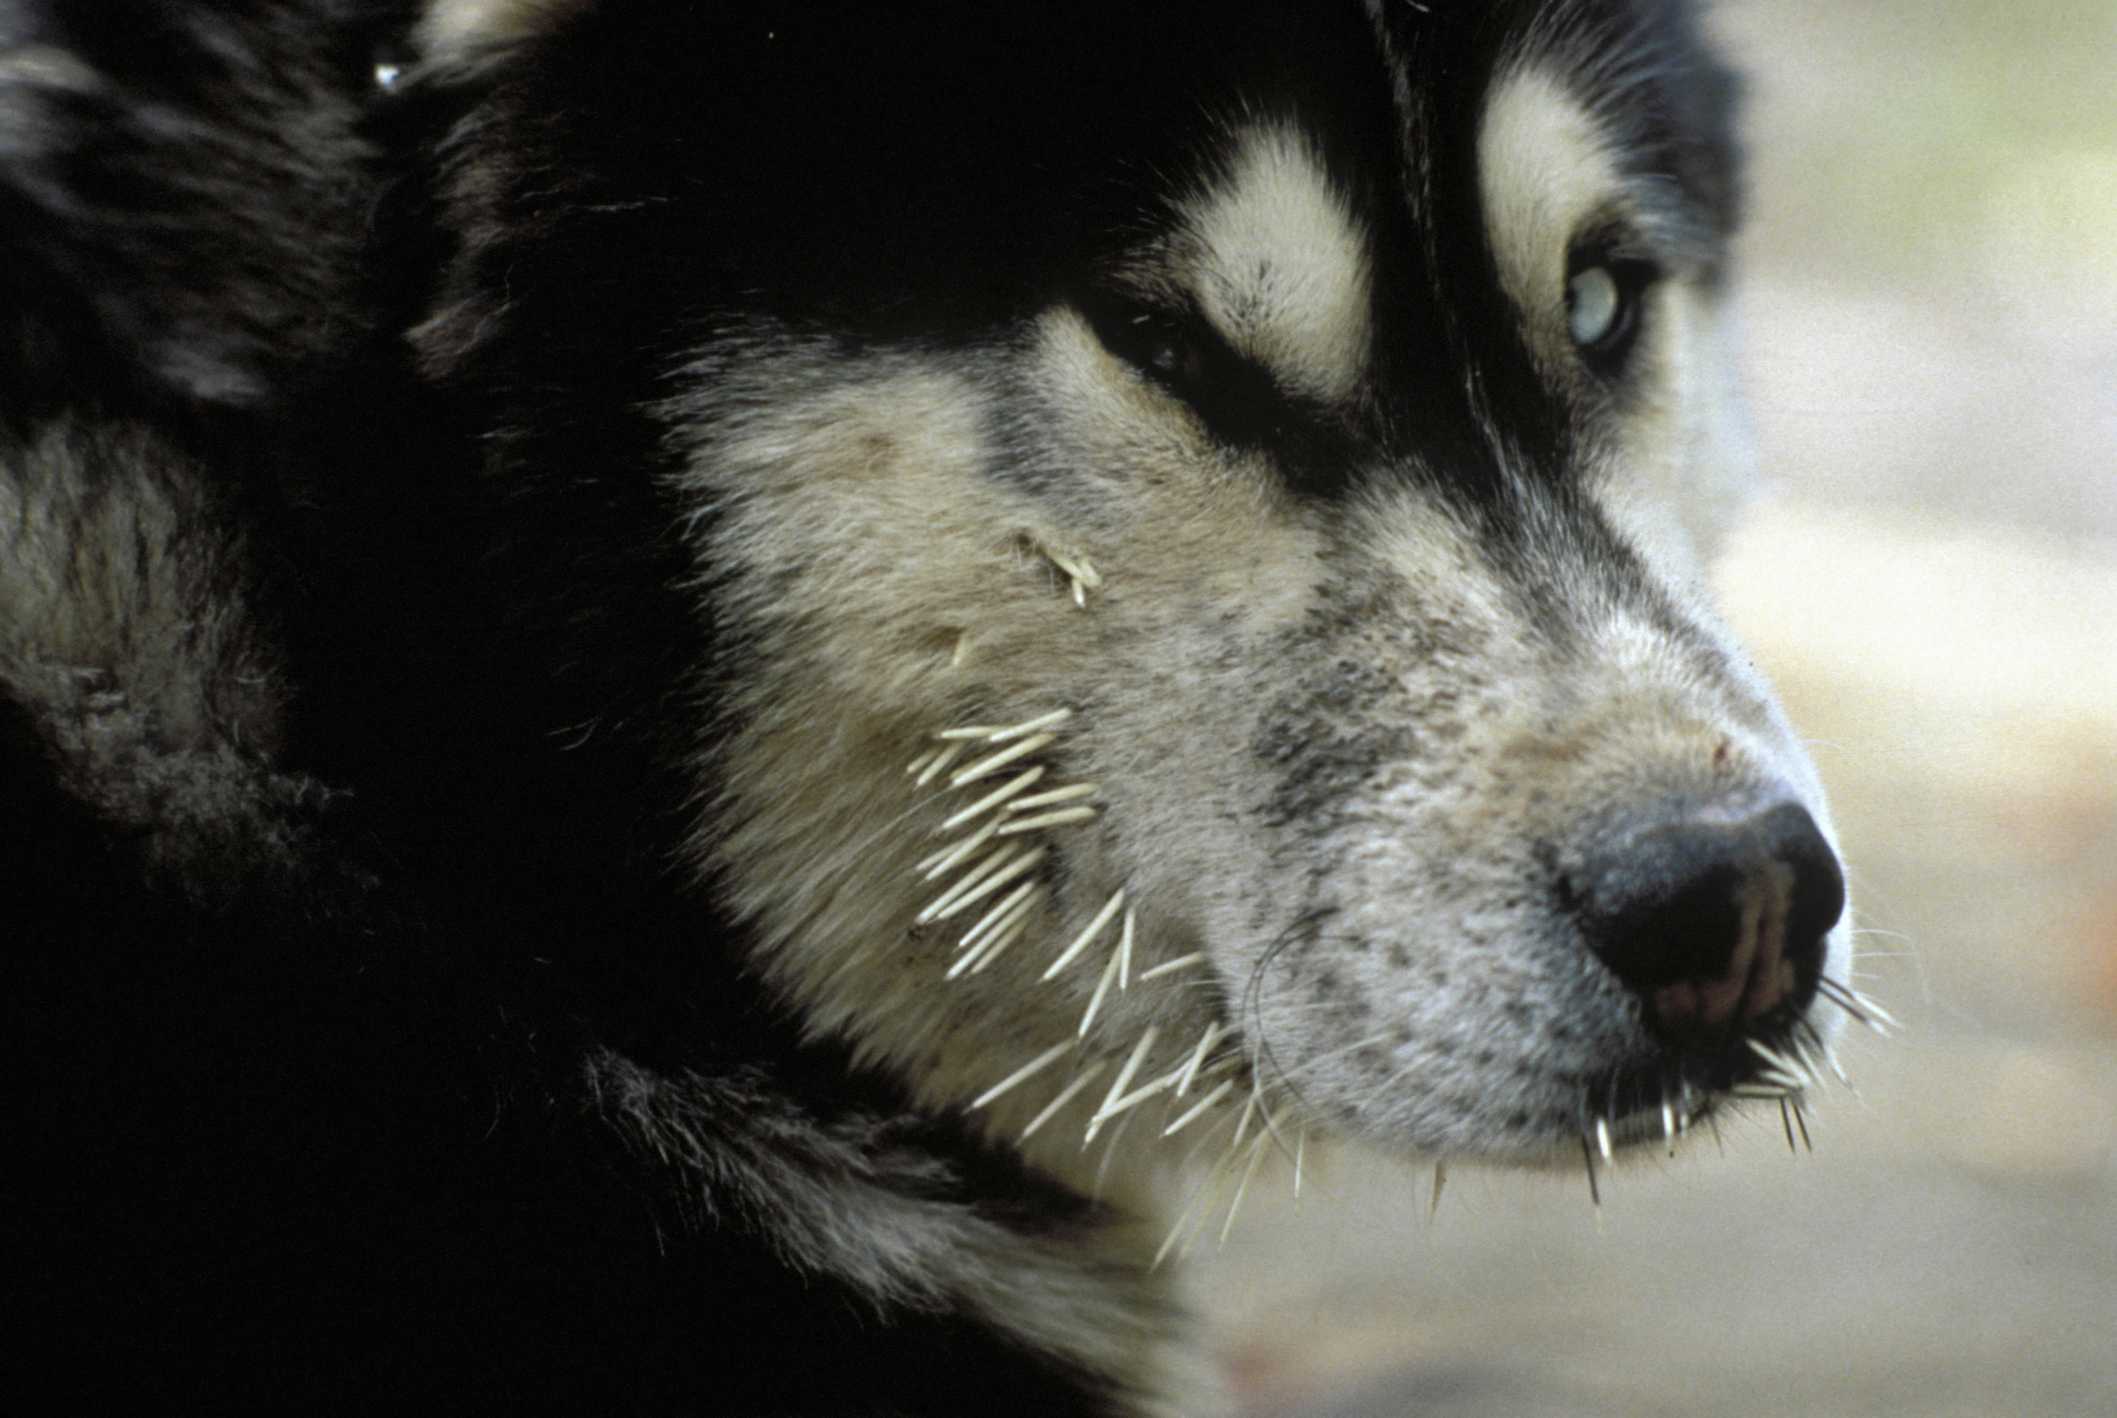 Malamute with quills in its muzzle